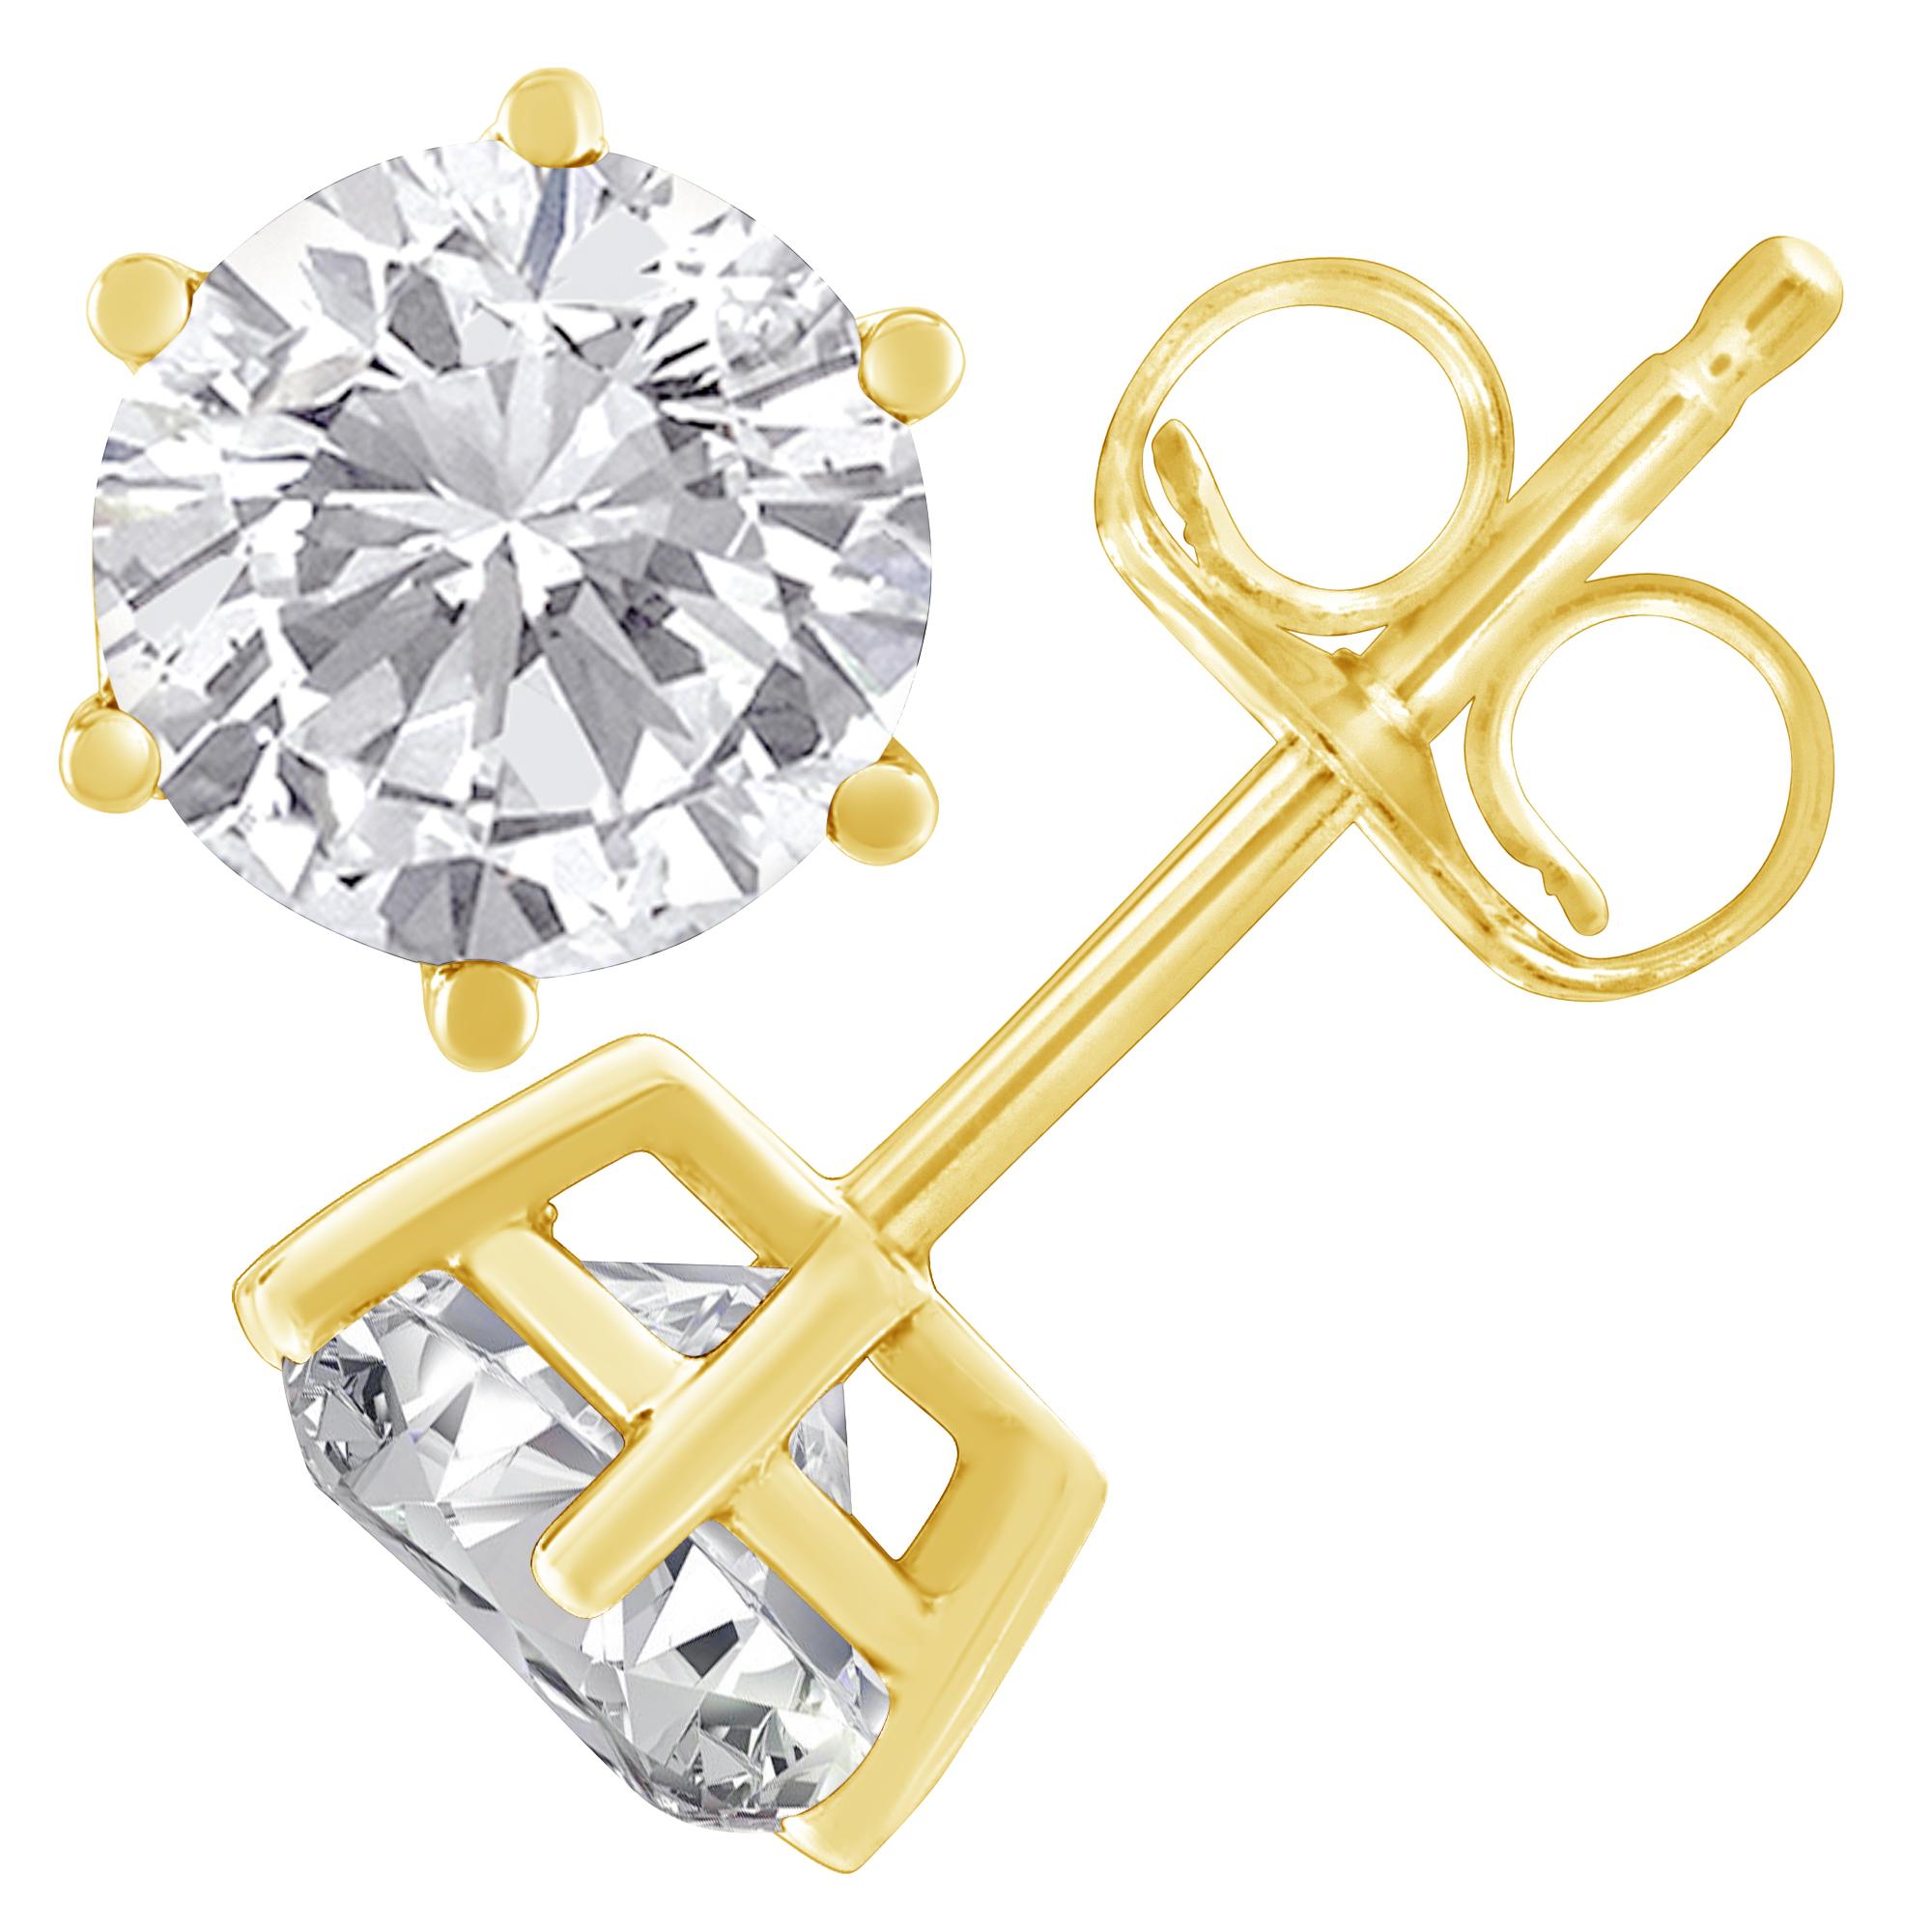 Frame her face with the bold and impressive look of these fabulous round cut diamond stud earrings. Crafted in 18K yellow gold, each earring features a mesmerizing 0.75 ct. diamond solitaire in a six-prong setting. Captivating with 1.25 ct tdw of